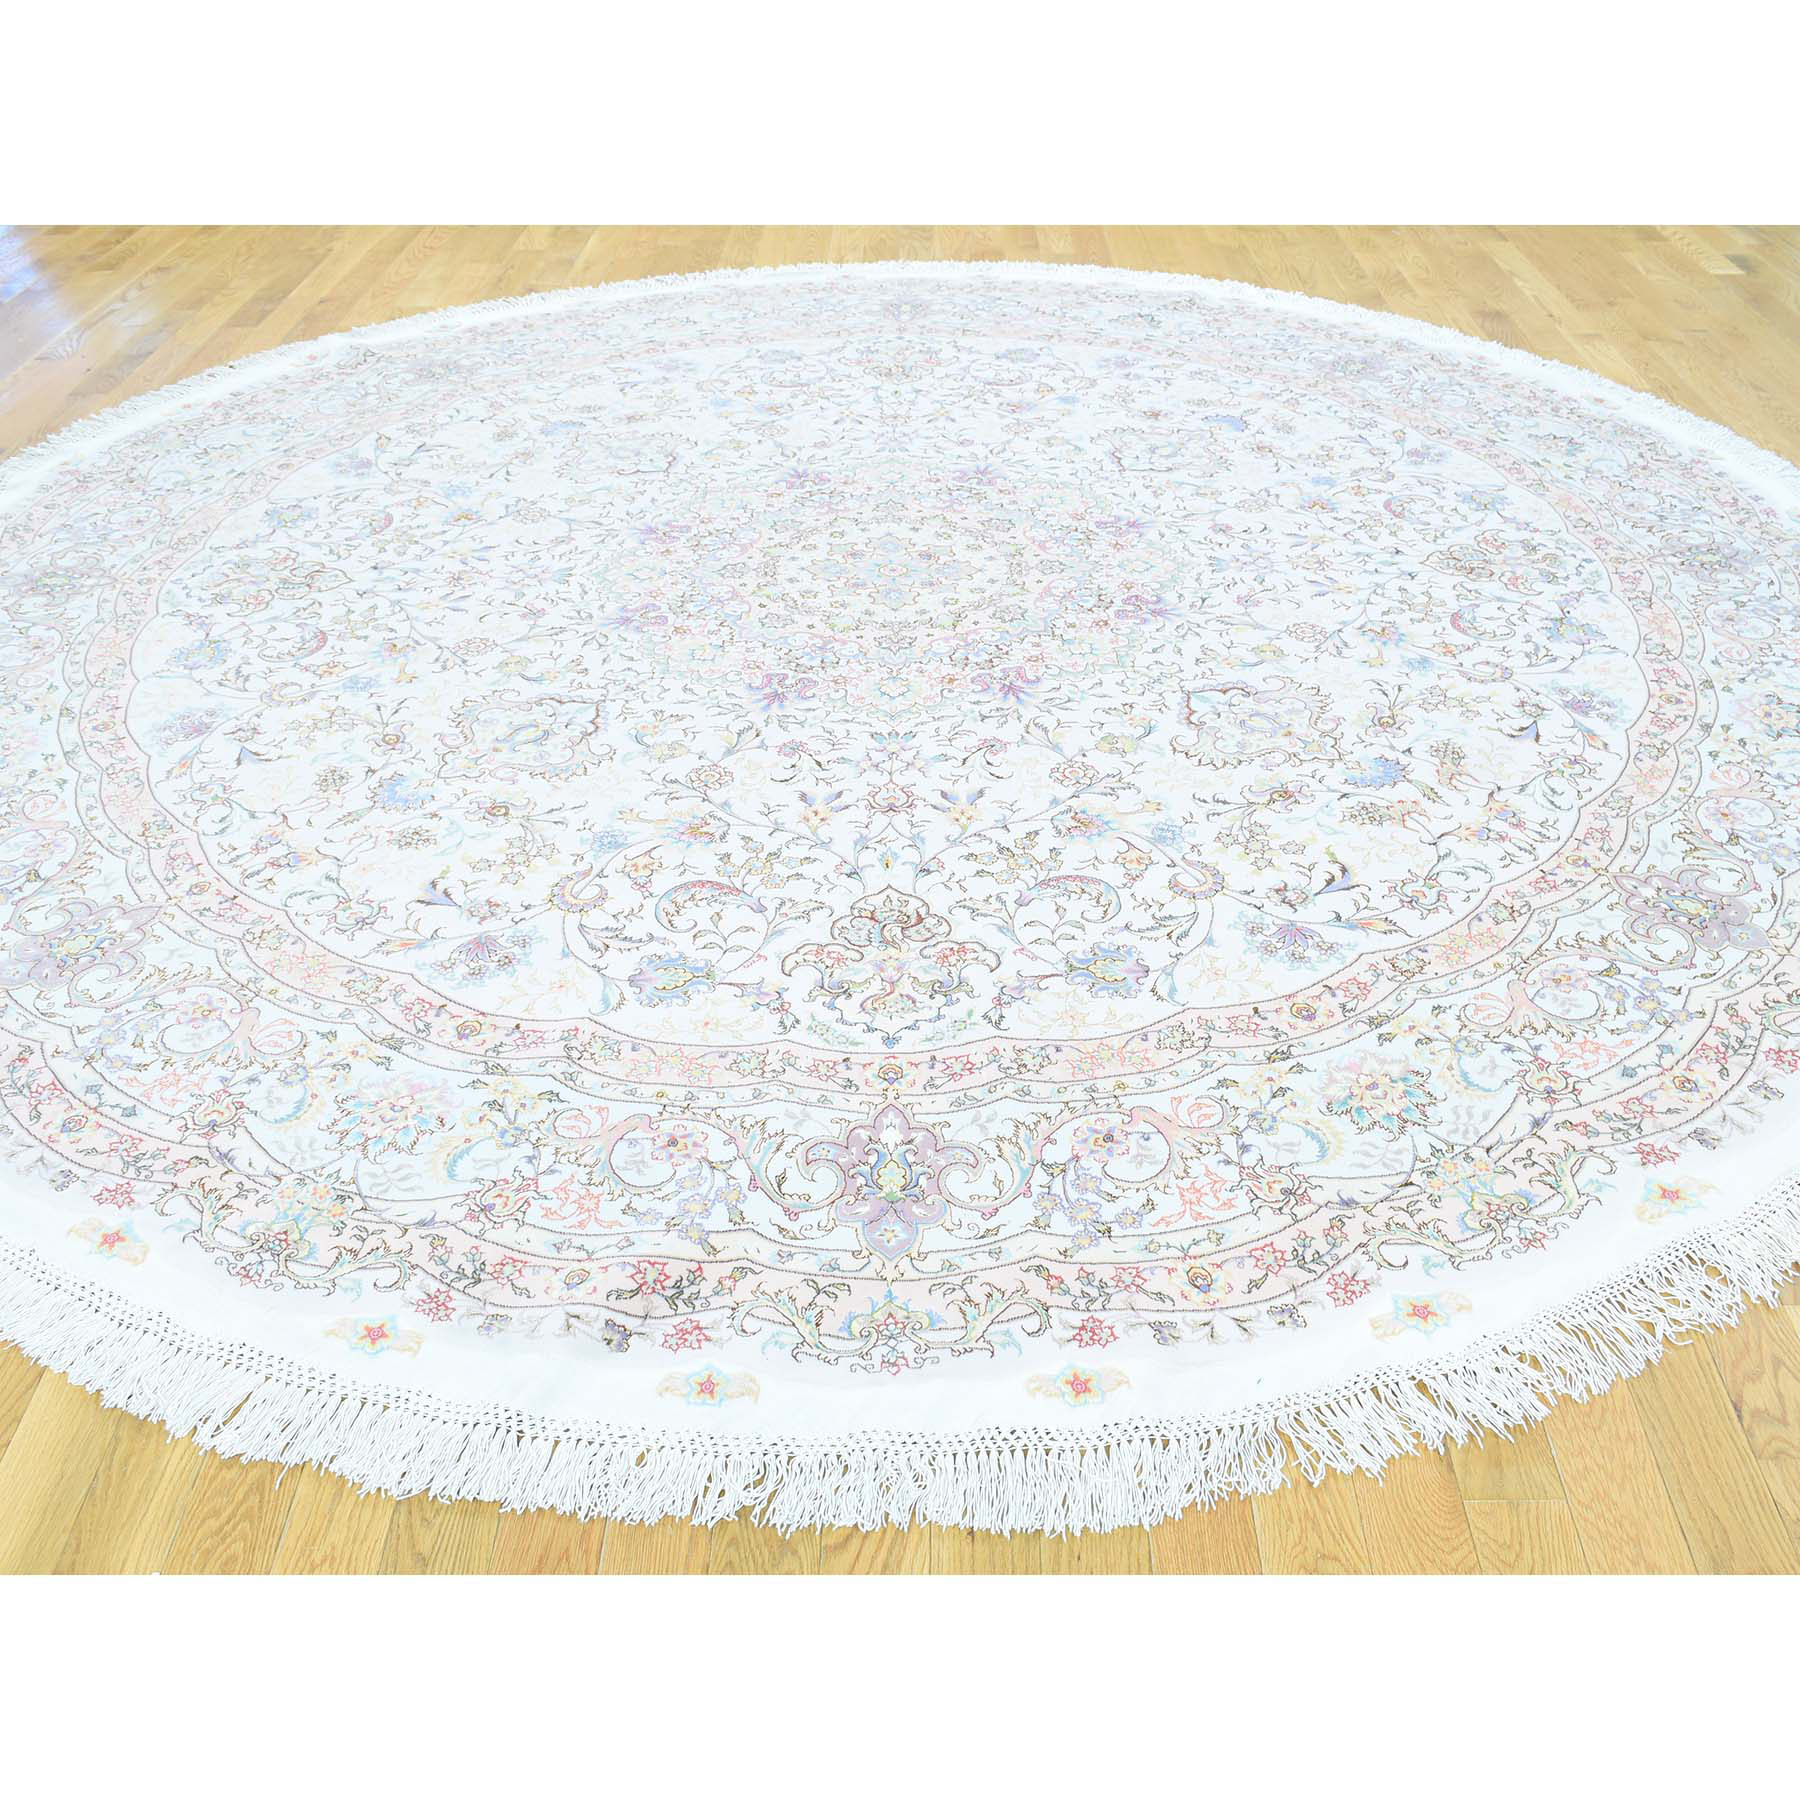 10-1 x10-1  Hand-Knotted Persian Tabriz Round Wool And Silk Oriental Rug 